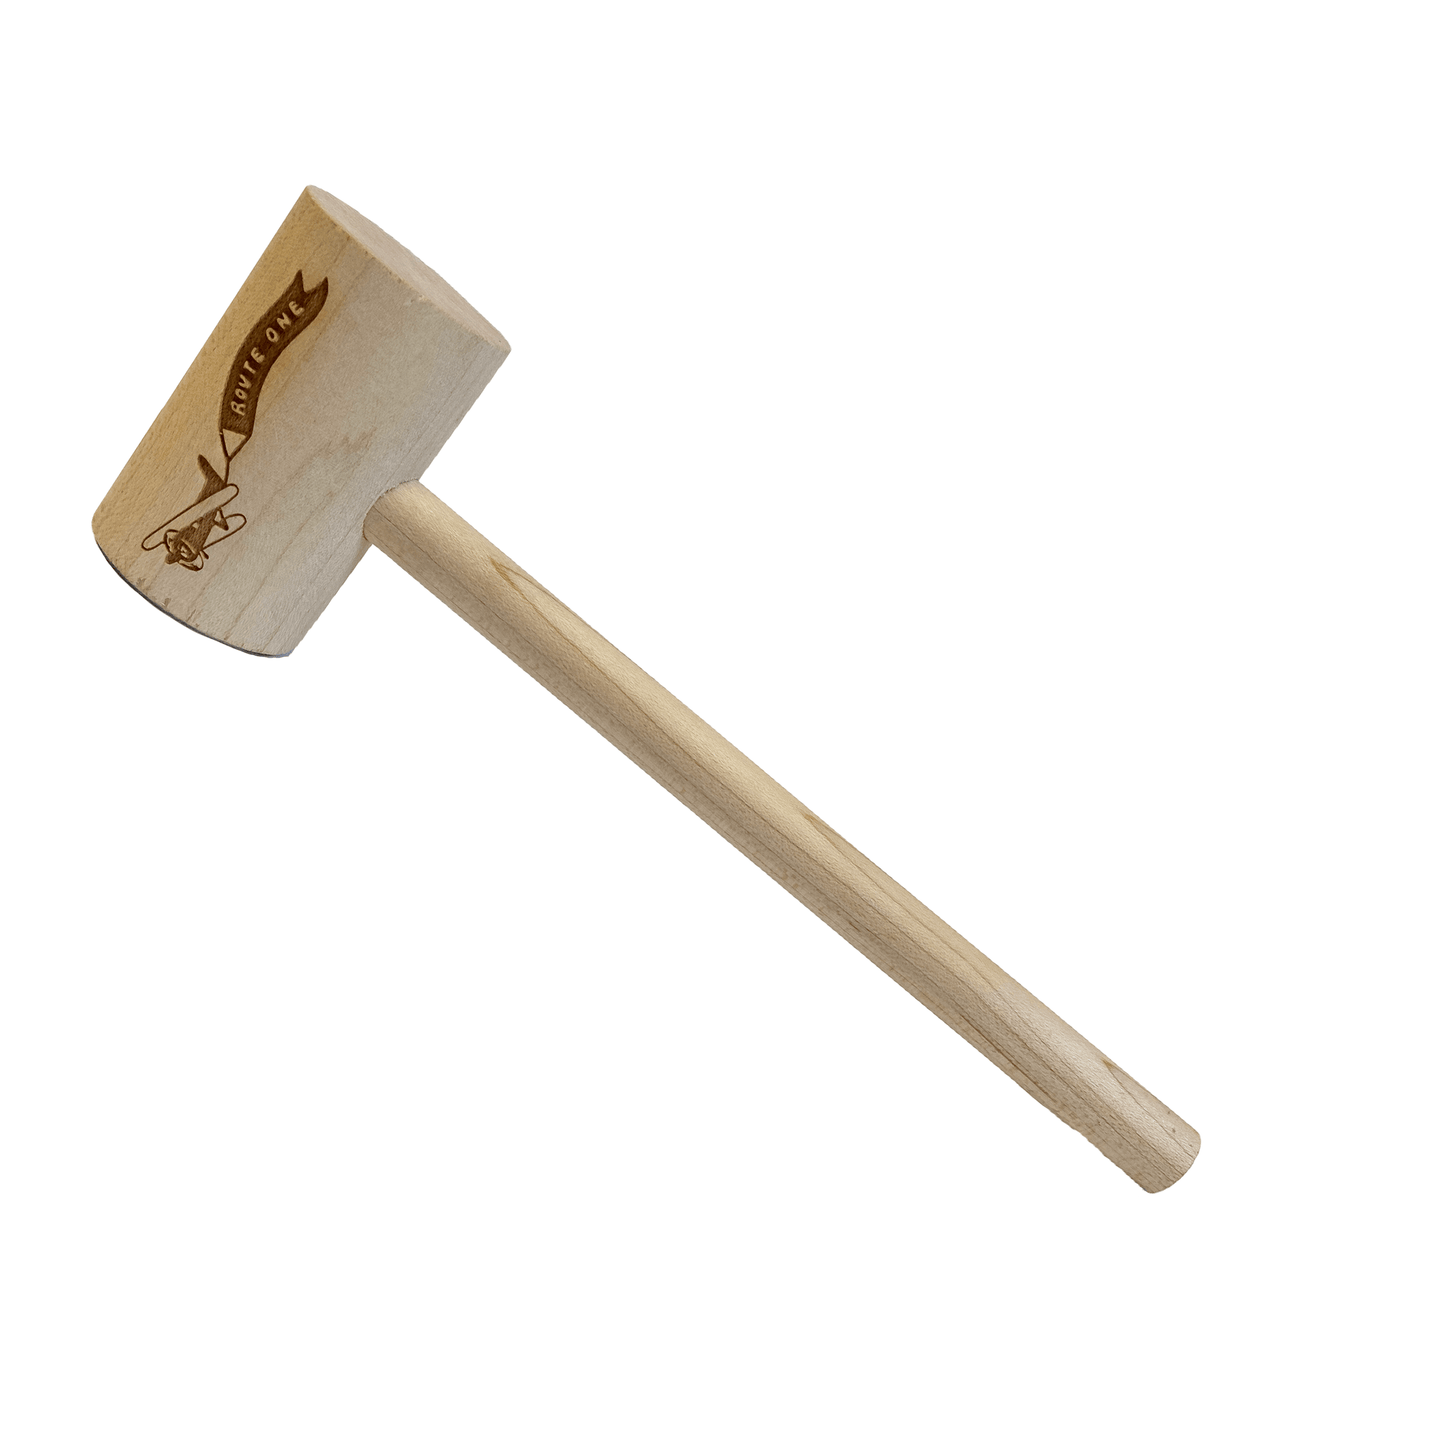 Flying Route One / Crab Mallet with Bottle Opener